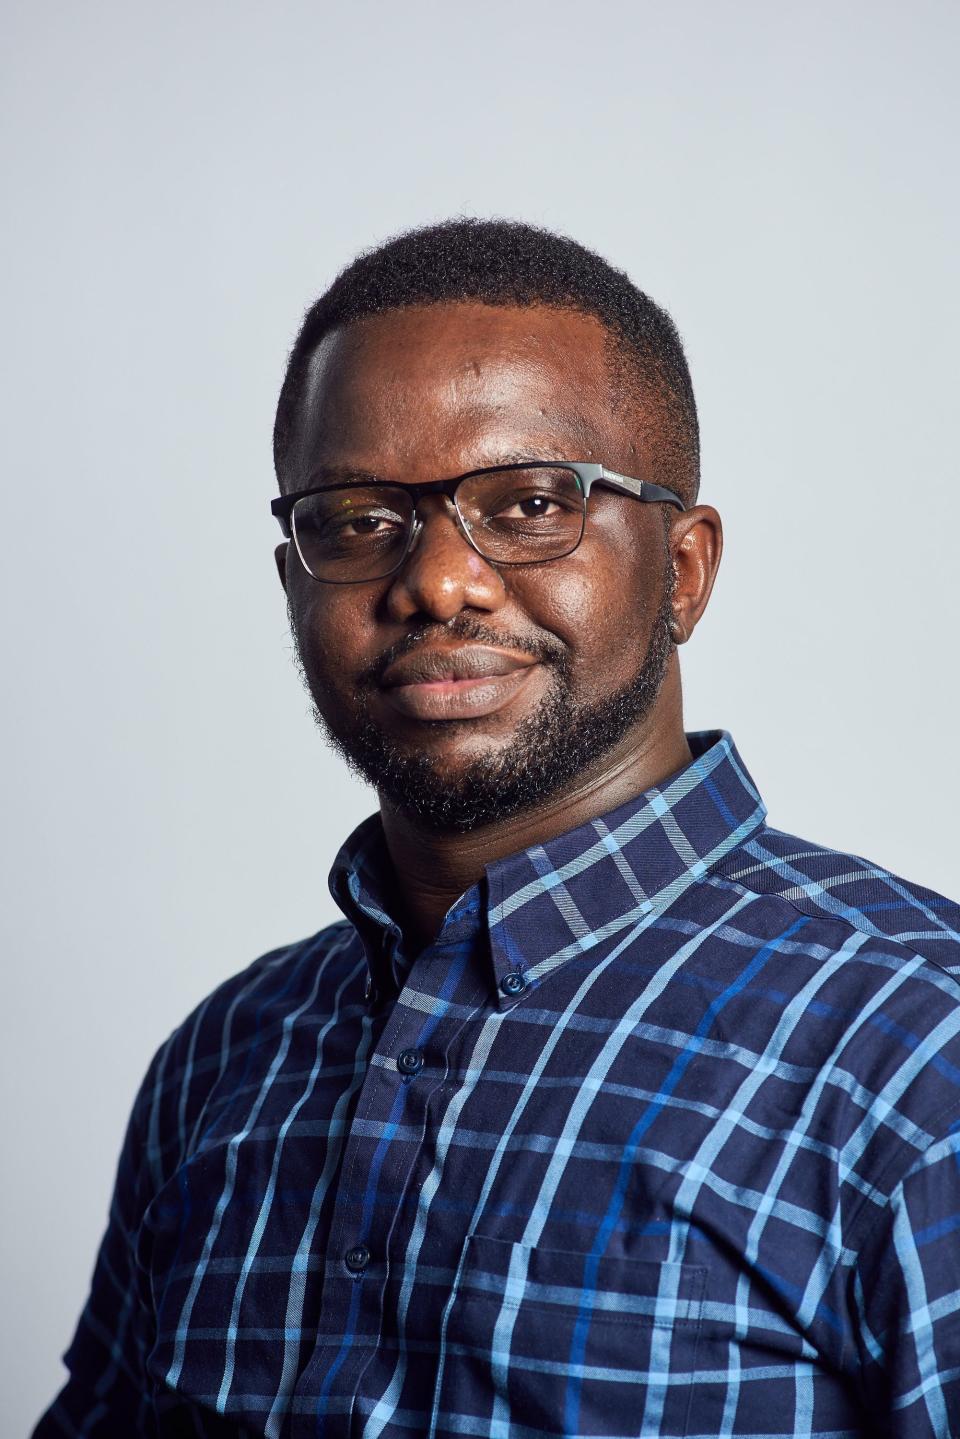 Arthur Muneza, from Africa, is one of 10 finalists for the Indianapolis Prize's Emerging Conservationist award. Muneza's focus is on giraffes in East Africa.